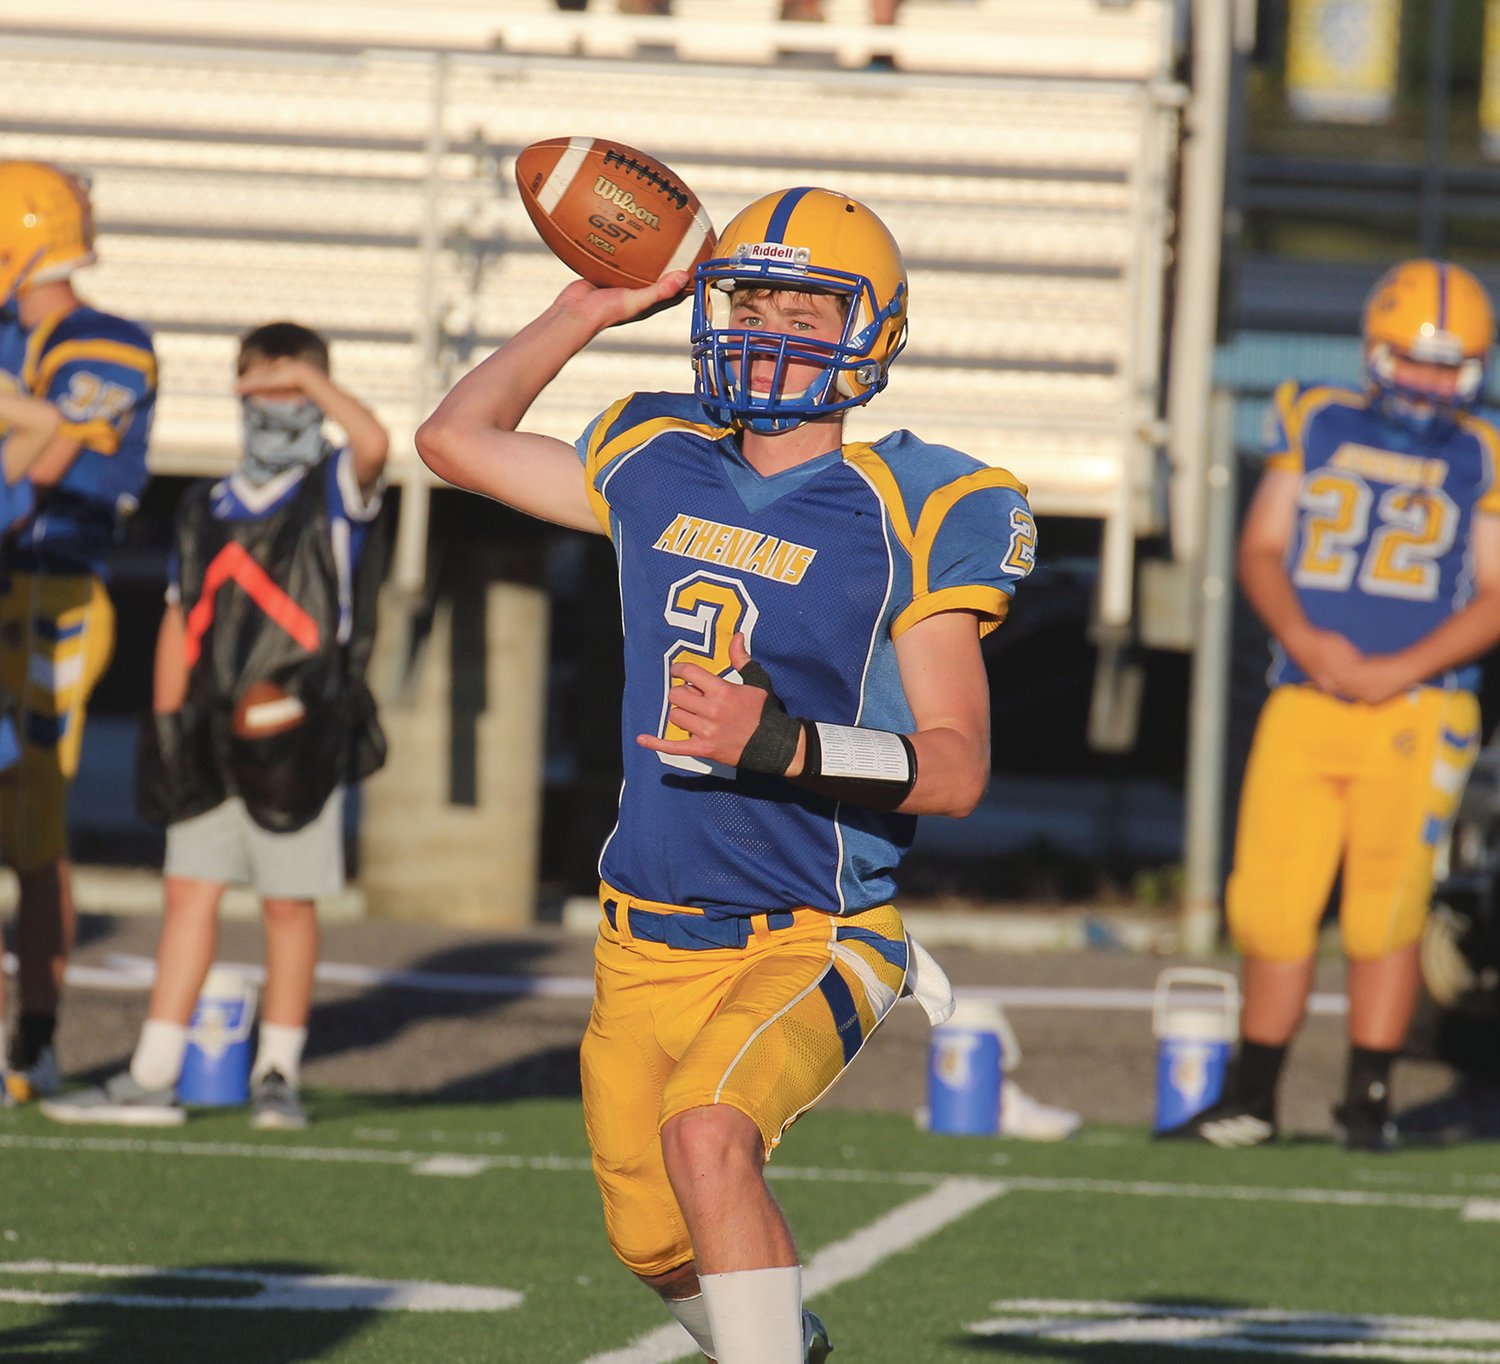 Kaiden Underwood fires a pass in the Athenians' 48-14 loss to Western Boone.